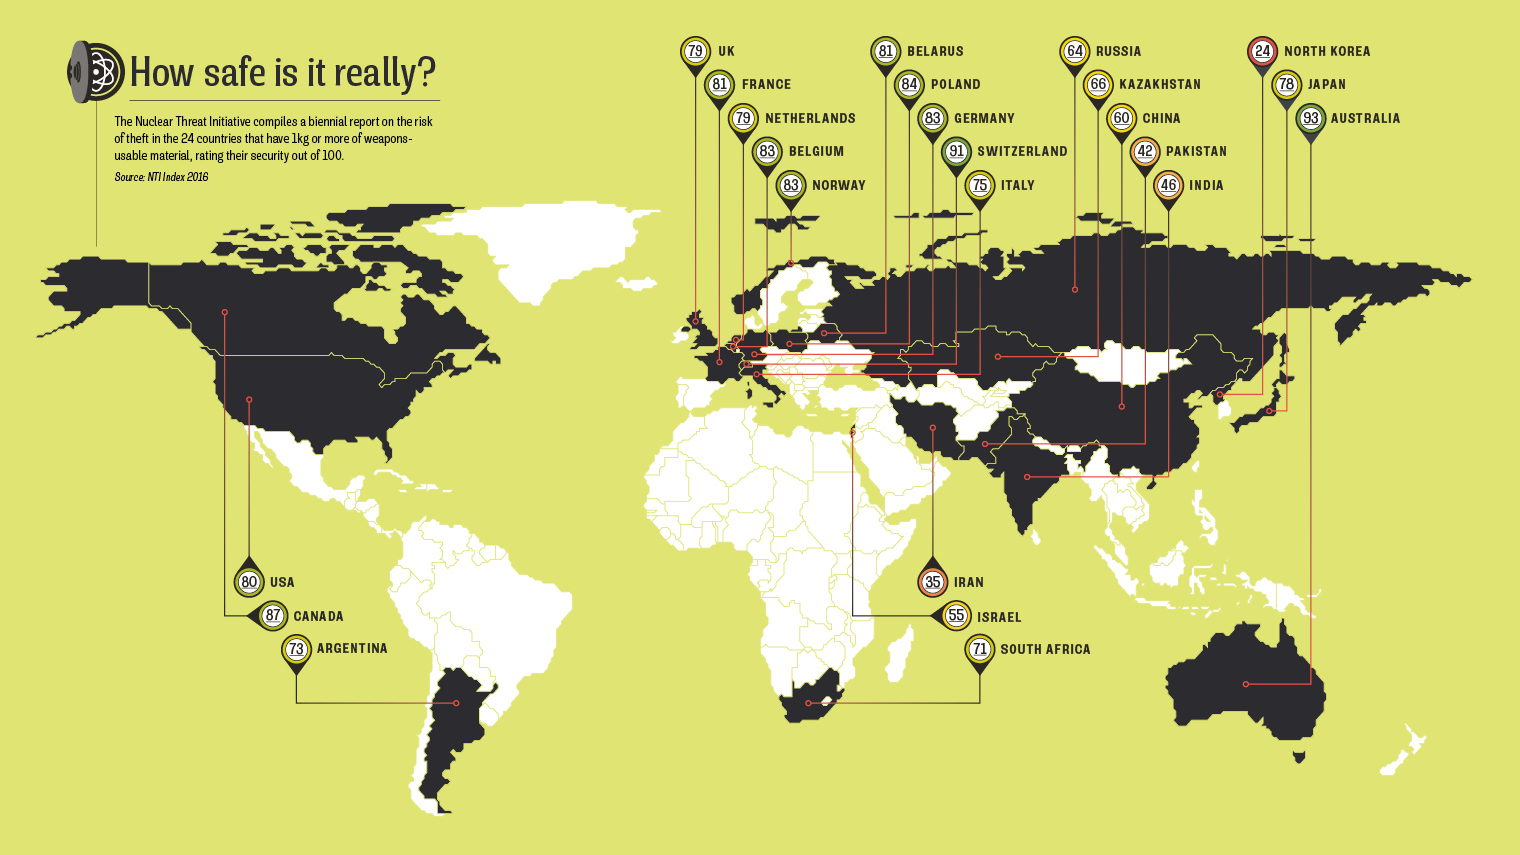 Infographic map looking at the risk of nuclear theft around the world